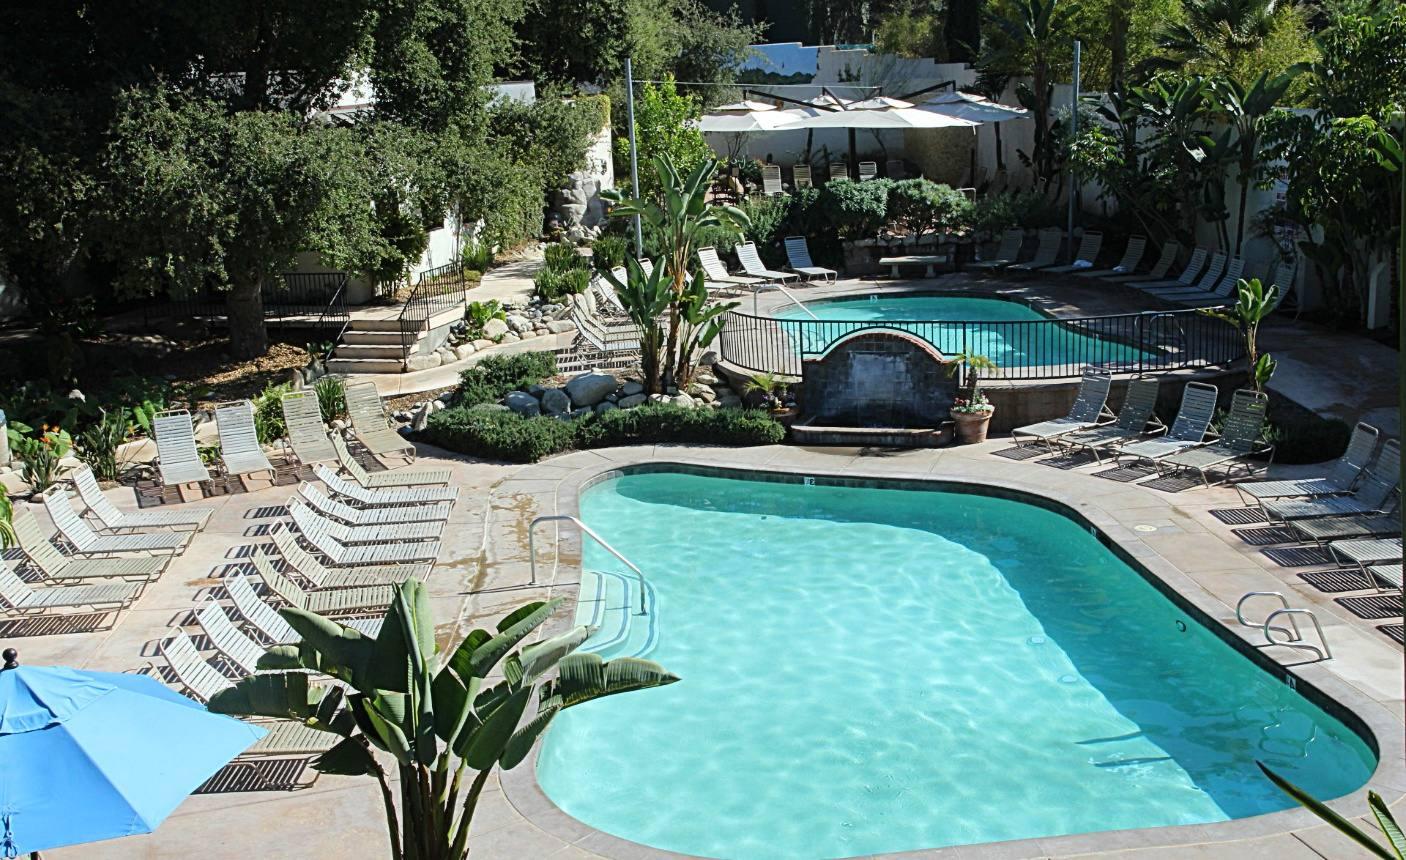 Beverly Hot Springs Spa a Natural Hot Springs In Southern California